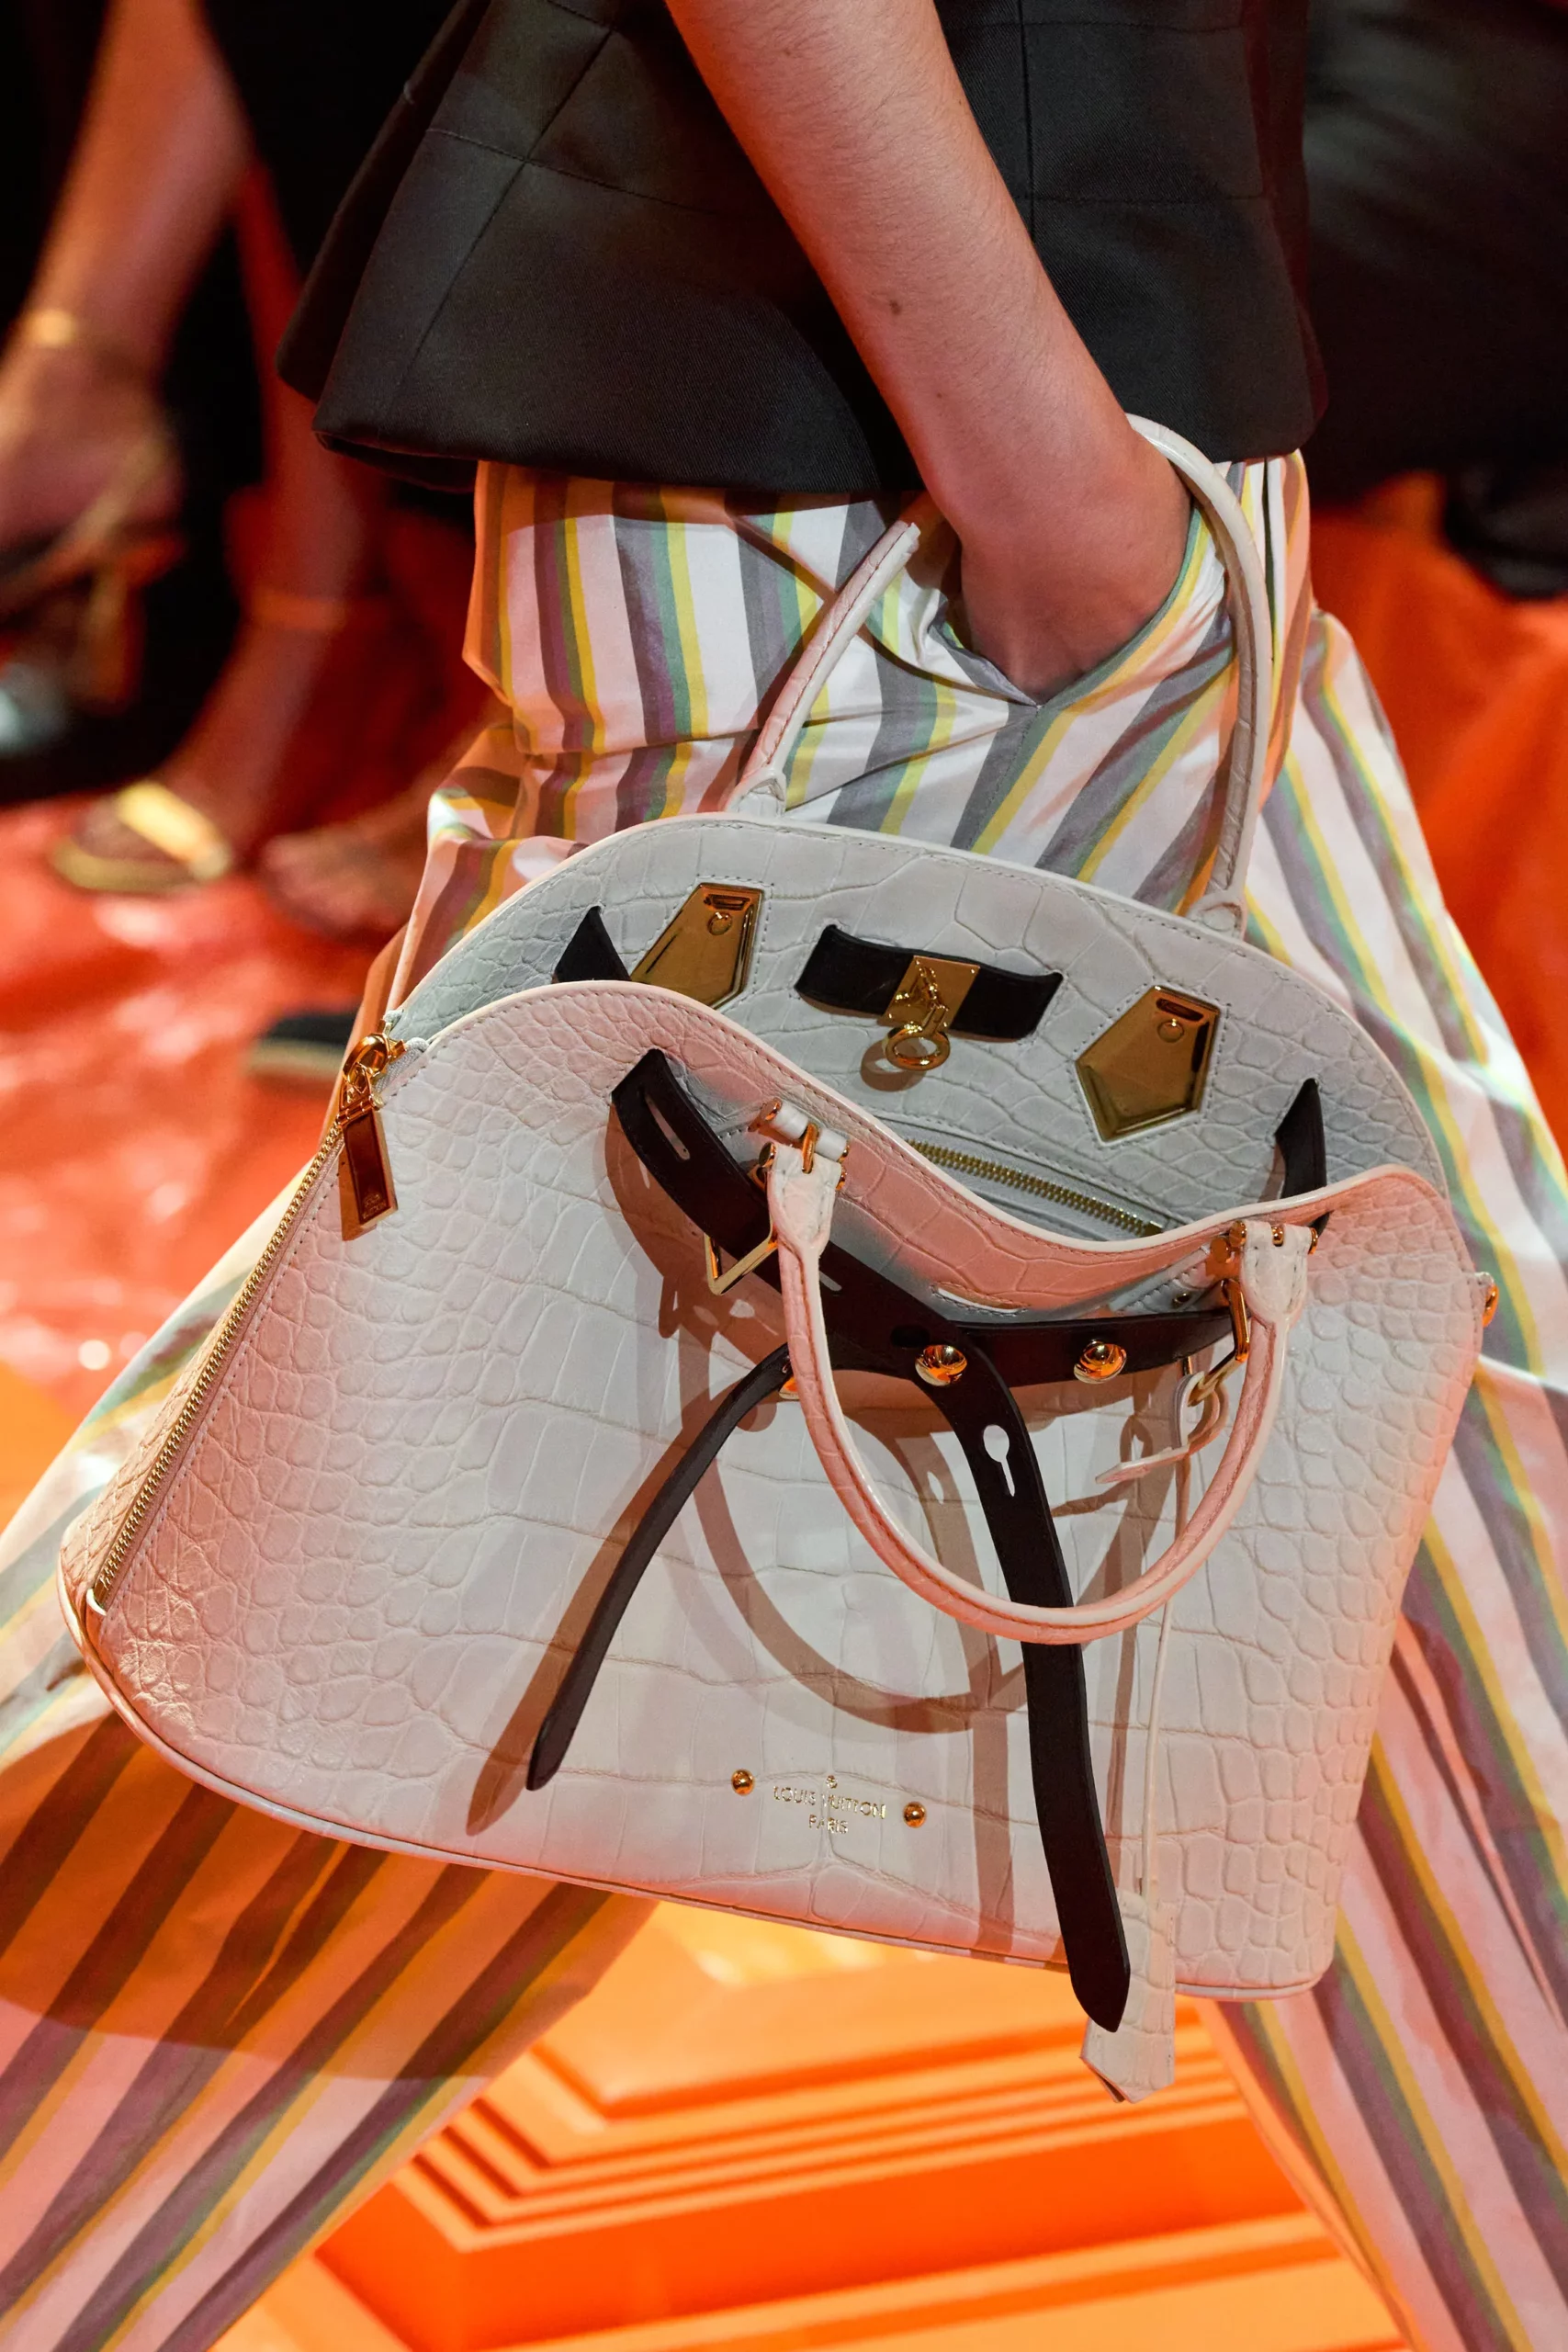 10 Most Expensive Louis Vuitton Bags Ever Made 